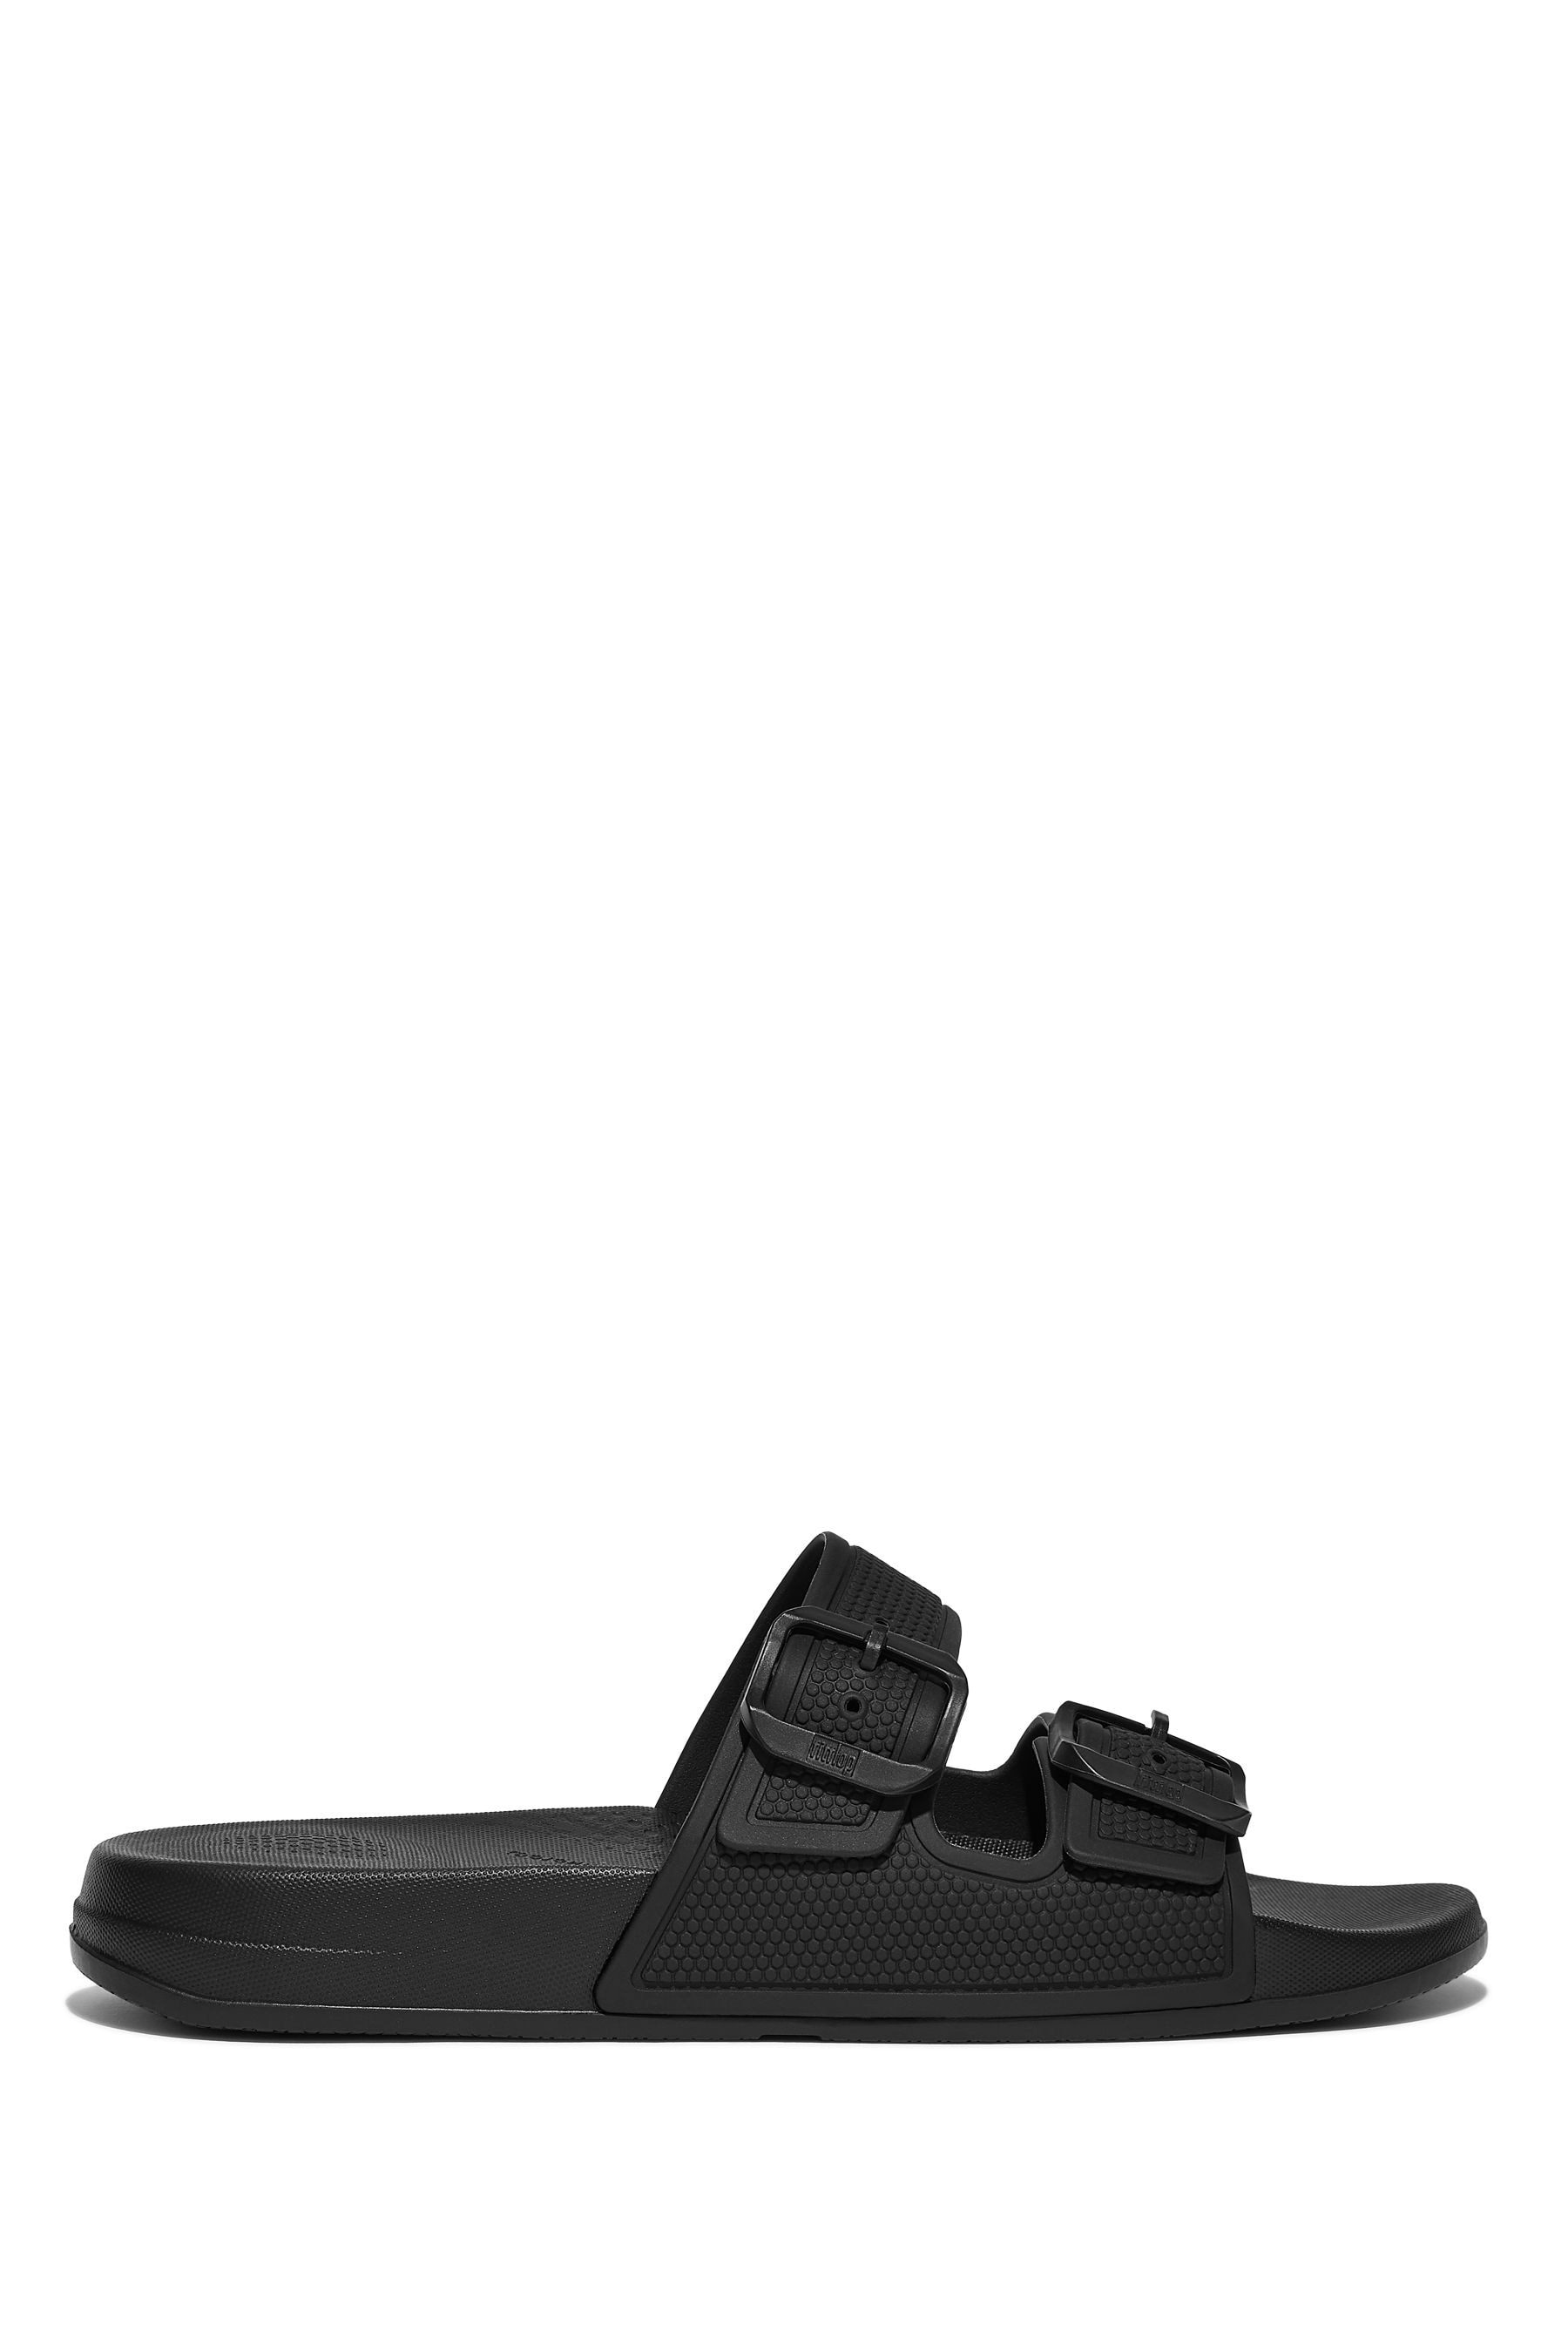 Buy FitFlop Black Iqushion Two-Bar Buckle Slides from the Next UK ...